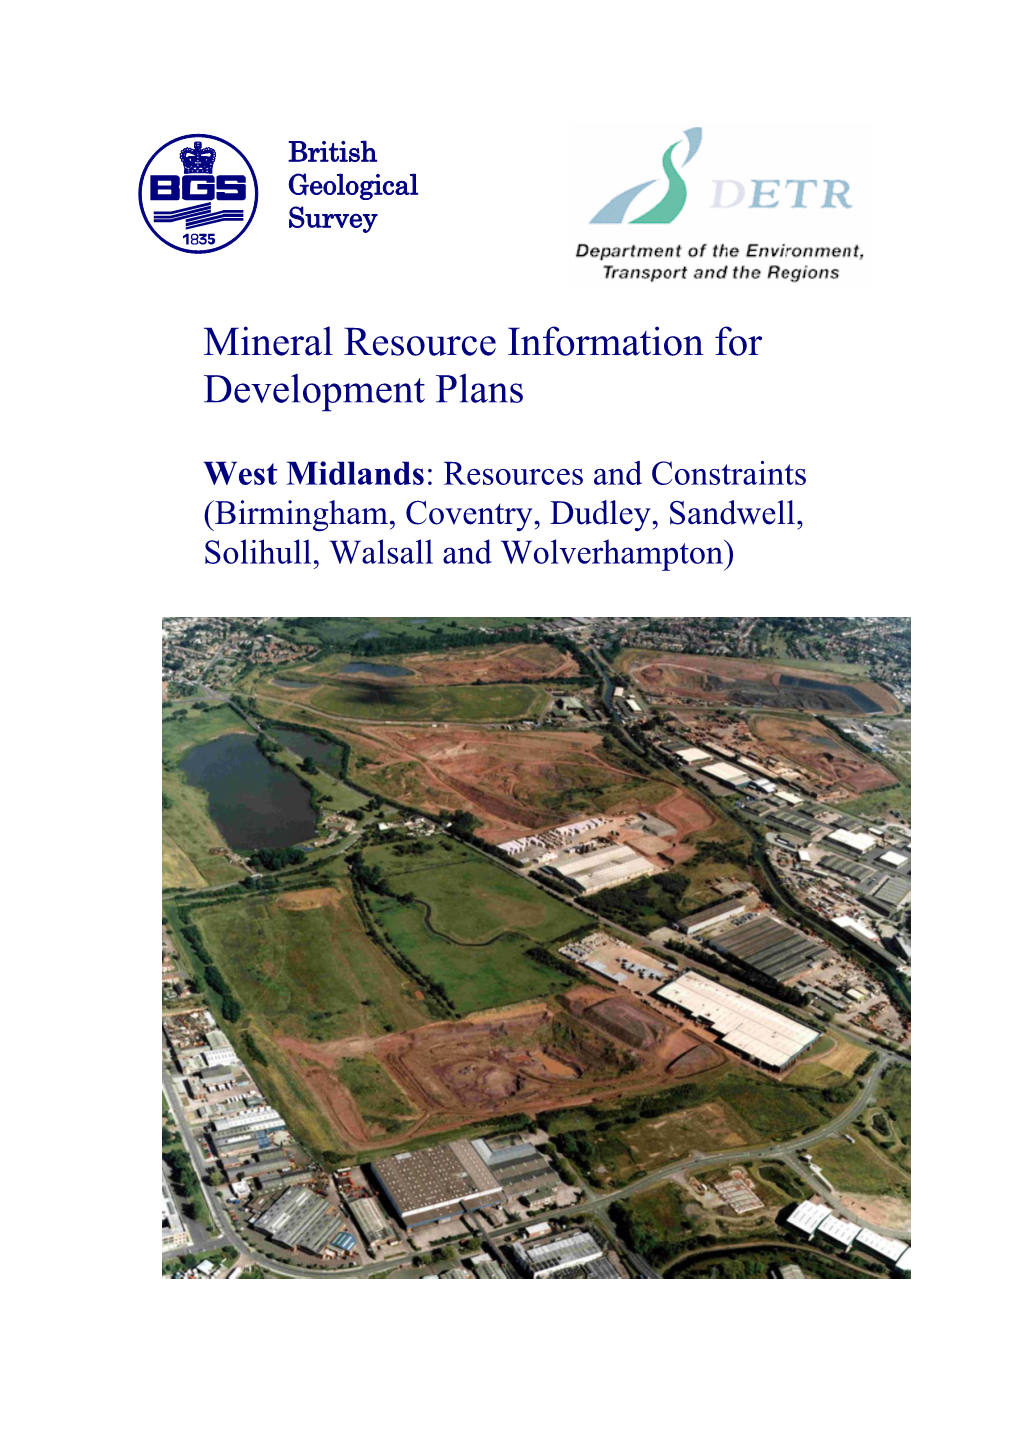 Mineral Resources Report for West Midlands